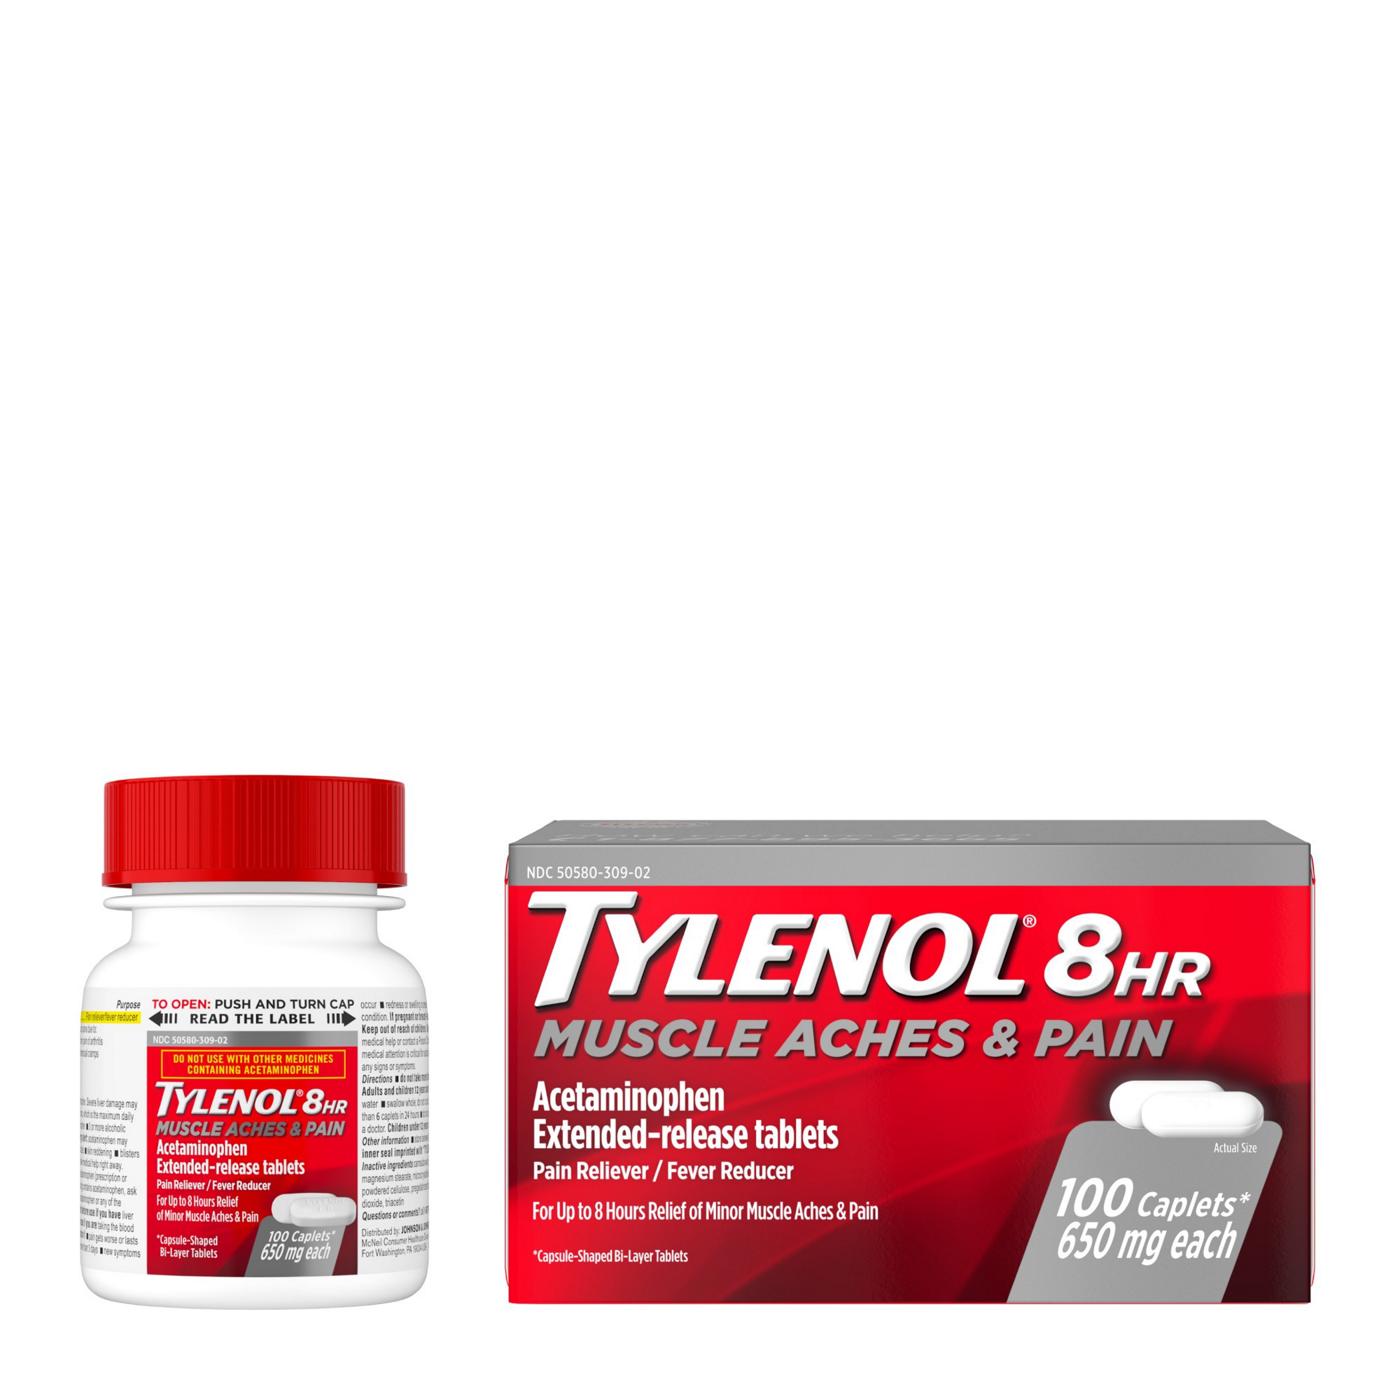 Tylenol 8 HR Muscle Aches & Pains; image 8 of 8